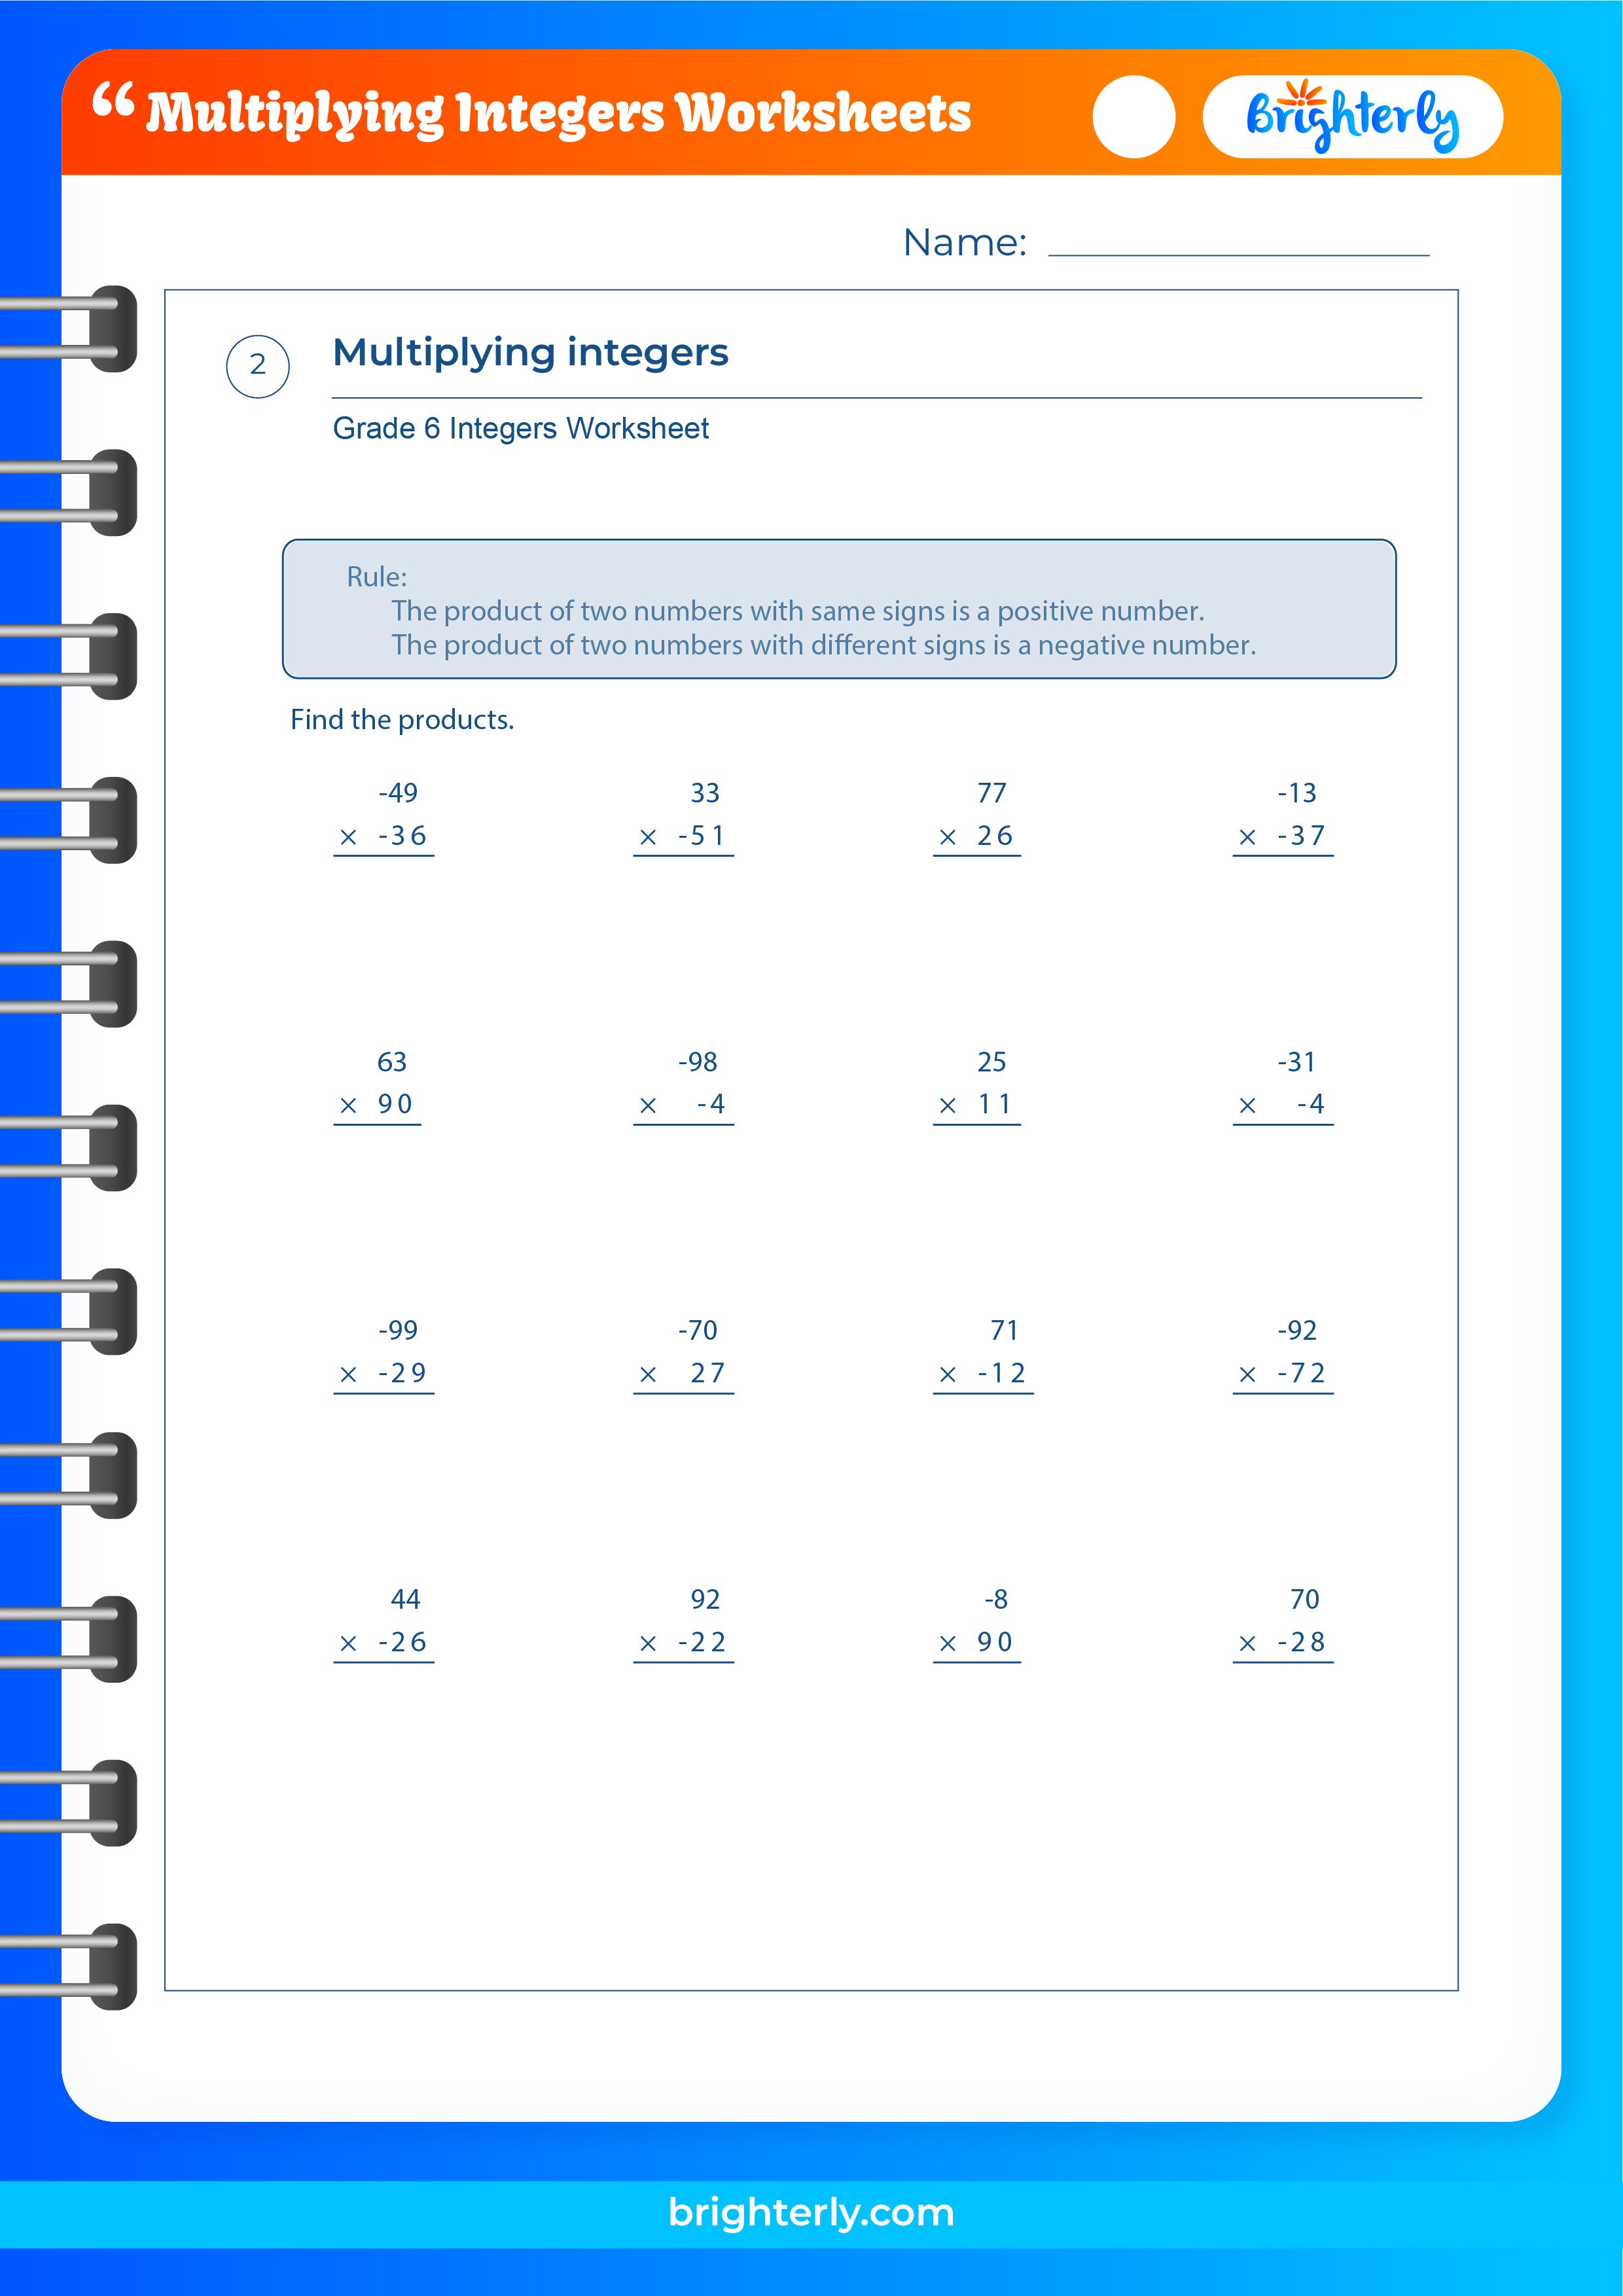 free-printable-multiplying-integers-worksheets-pdfs-brighterly